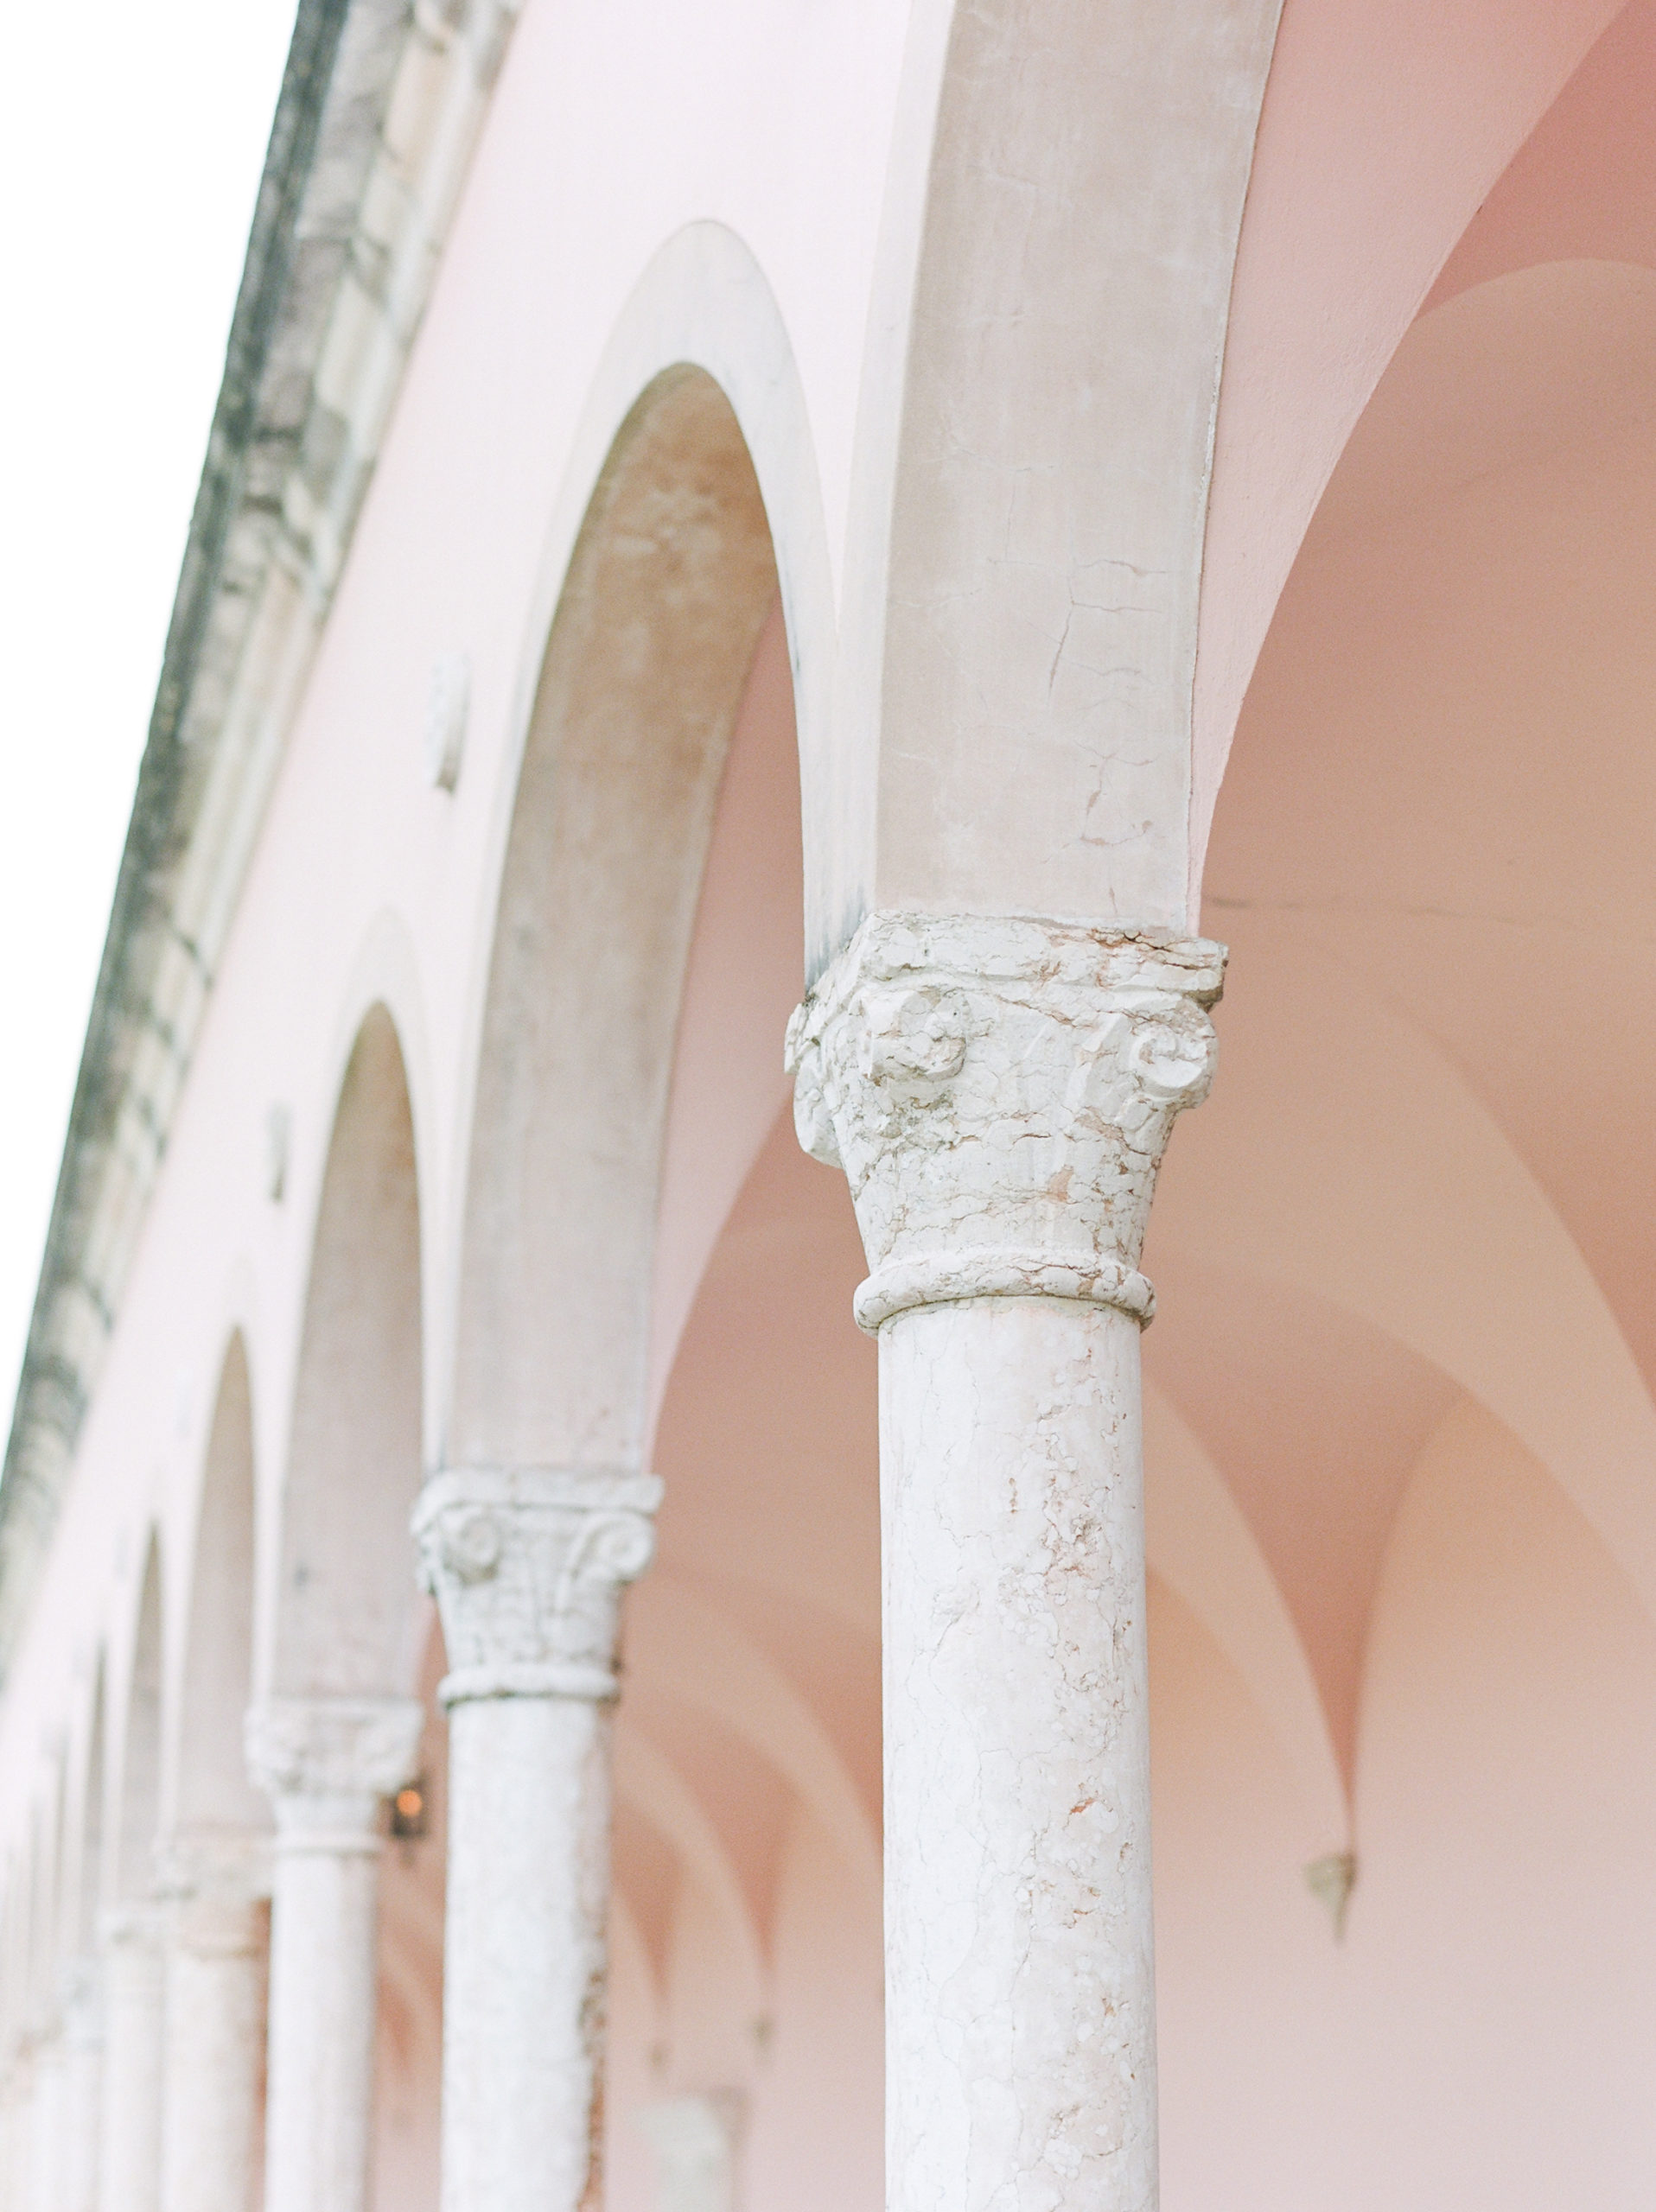 arches and columns ringling museum sarasota florida architecture belinda jean photography